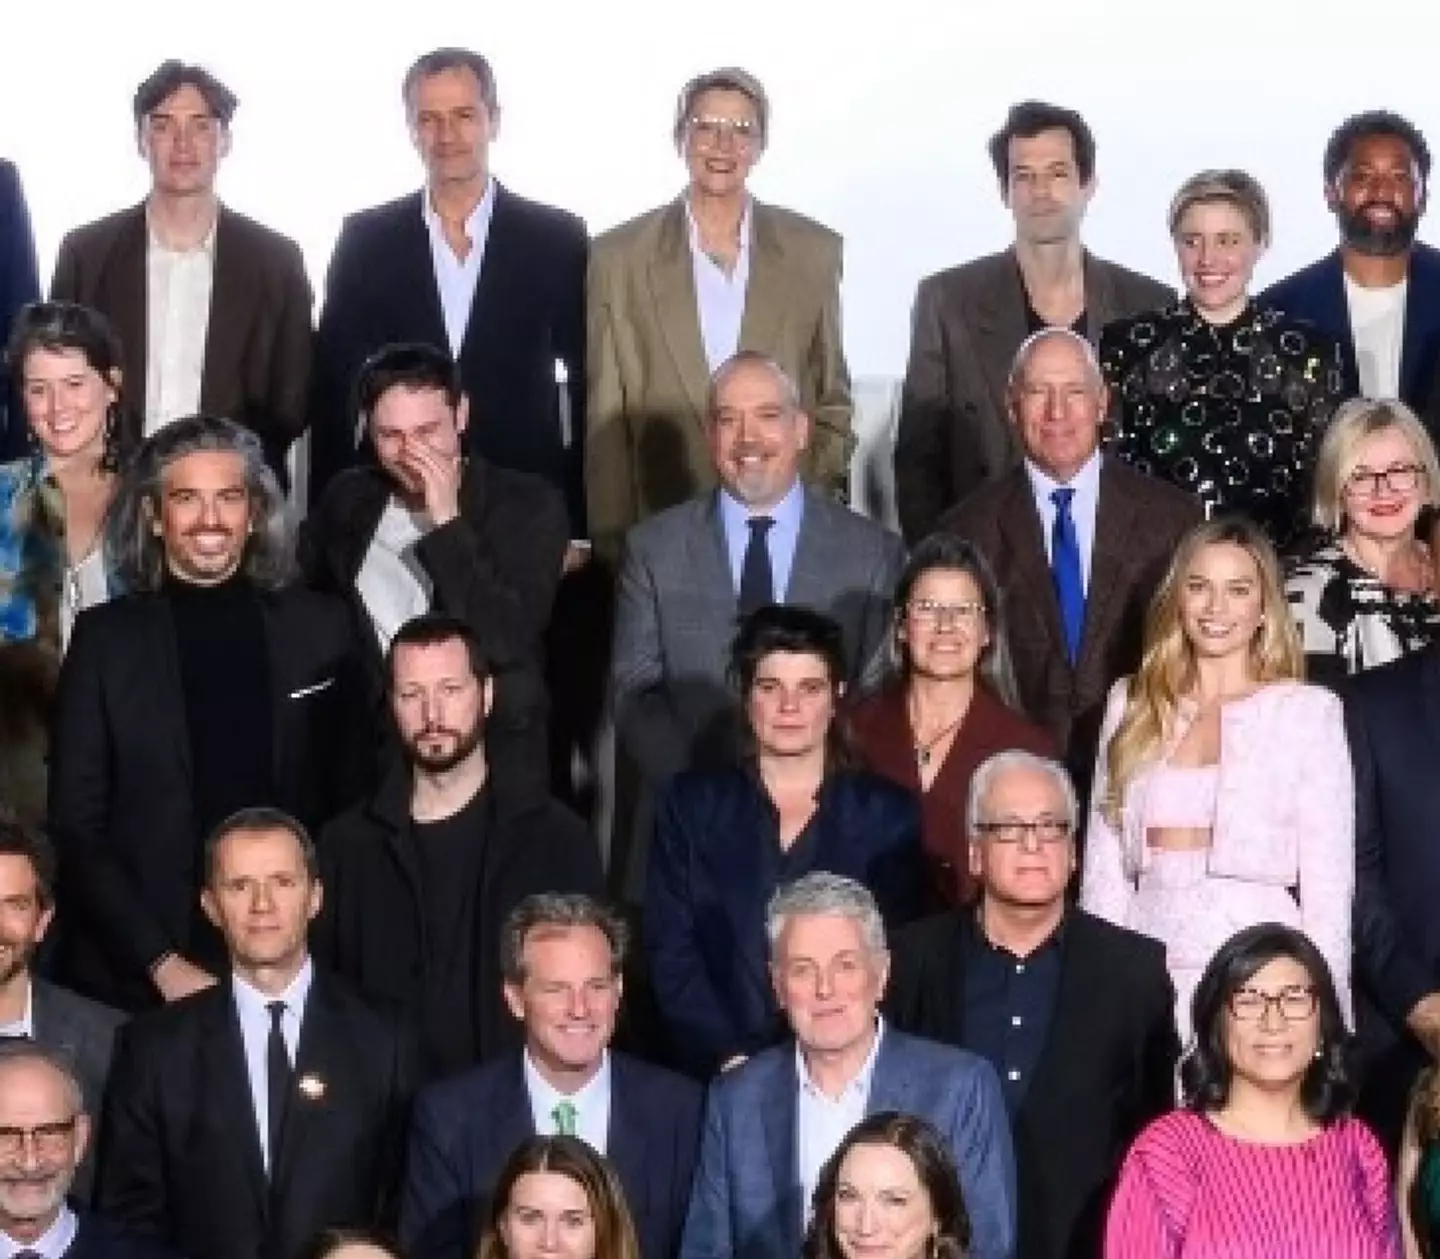 Anatomy of a Fall and Barbie directors Arthur Harai and Greta Gerwig appeared unable to keep a straight face for the photo.